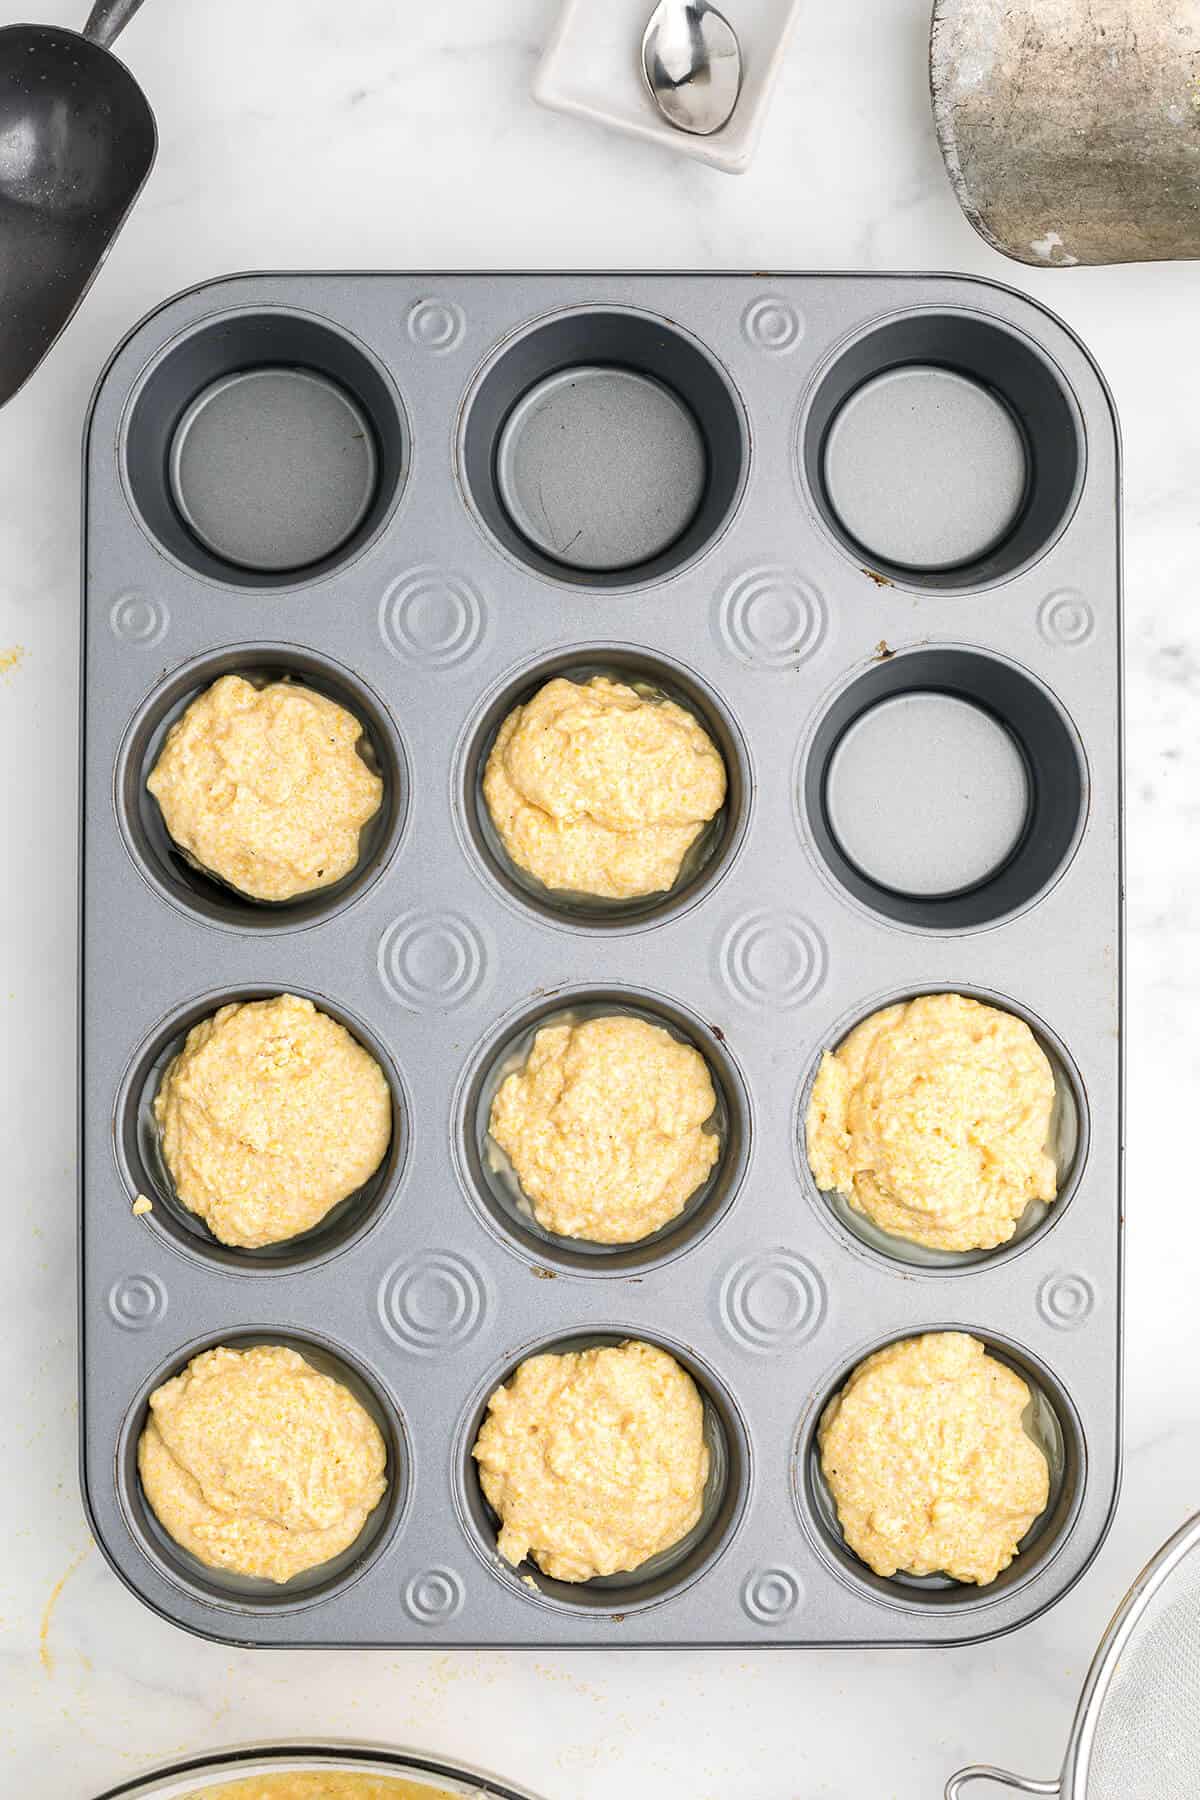 Muffin batter being added to muffin tin.